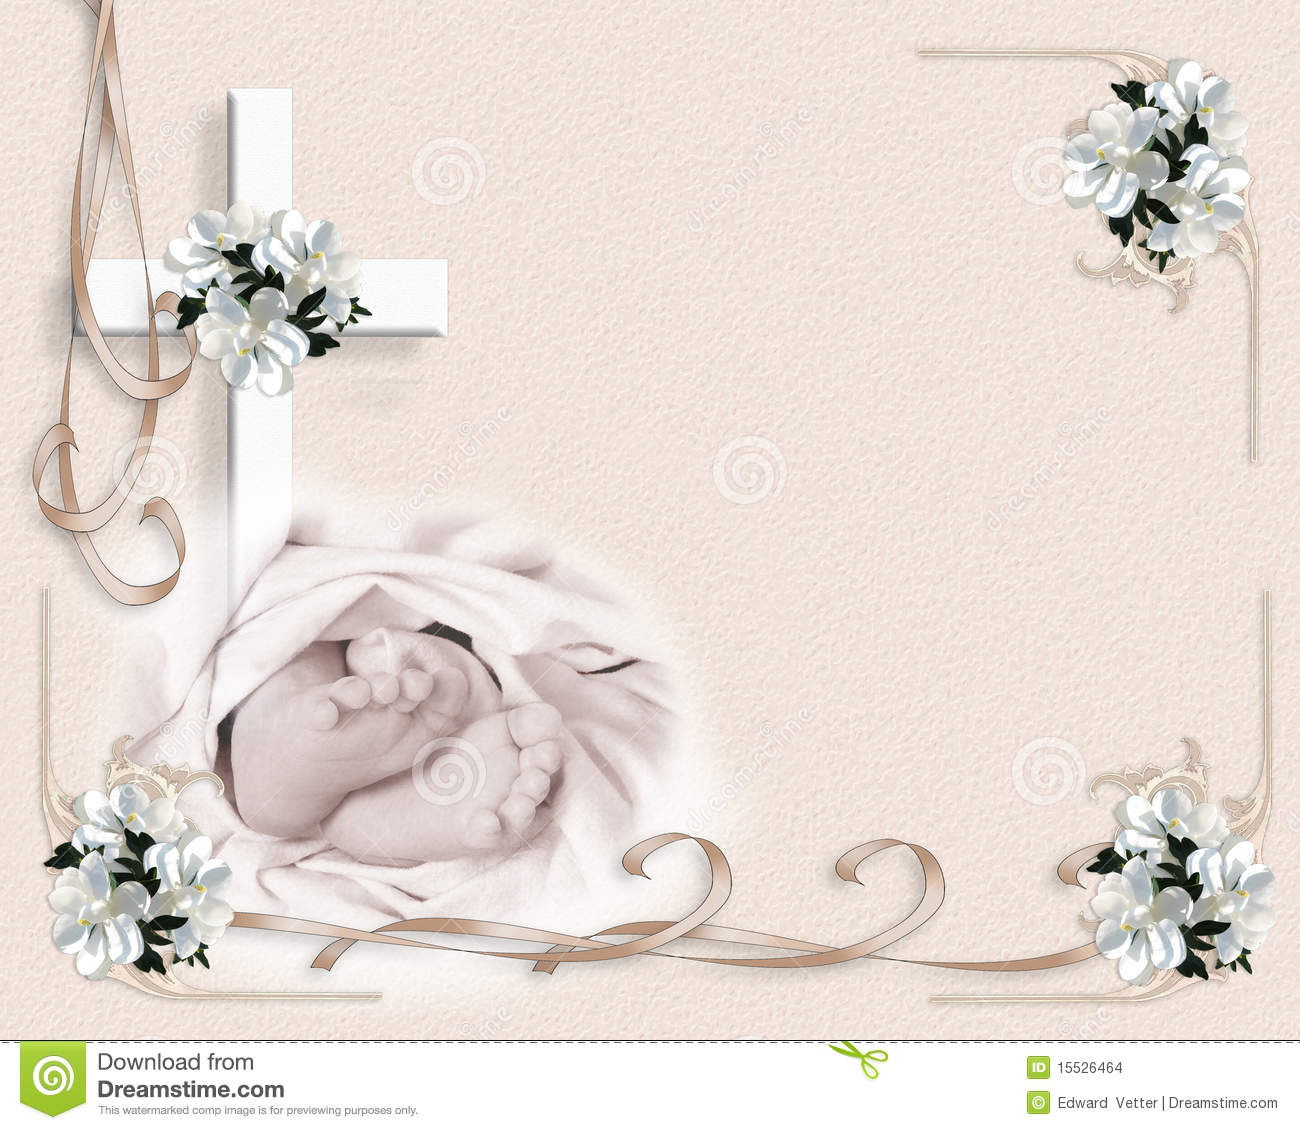 Image And Illustration Composition For Baby Baptism Or Christening